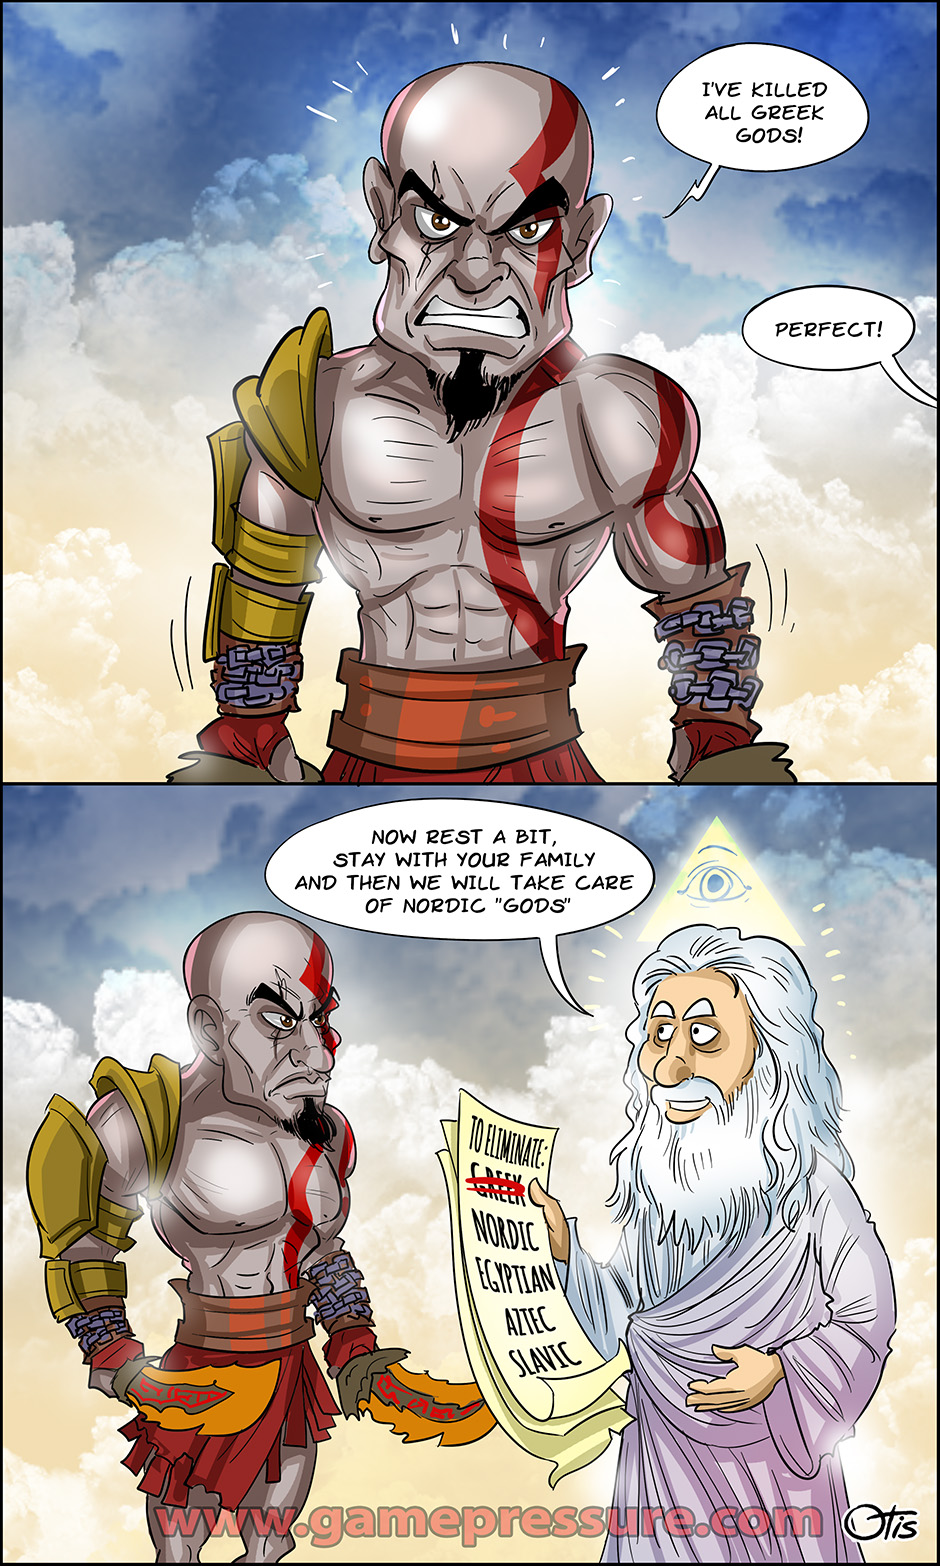 Kratos is ready for some god-slaying, comics Cartoon Games, #234. He's done with the Greek gods, now what?!